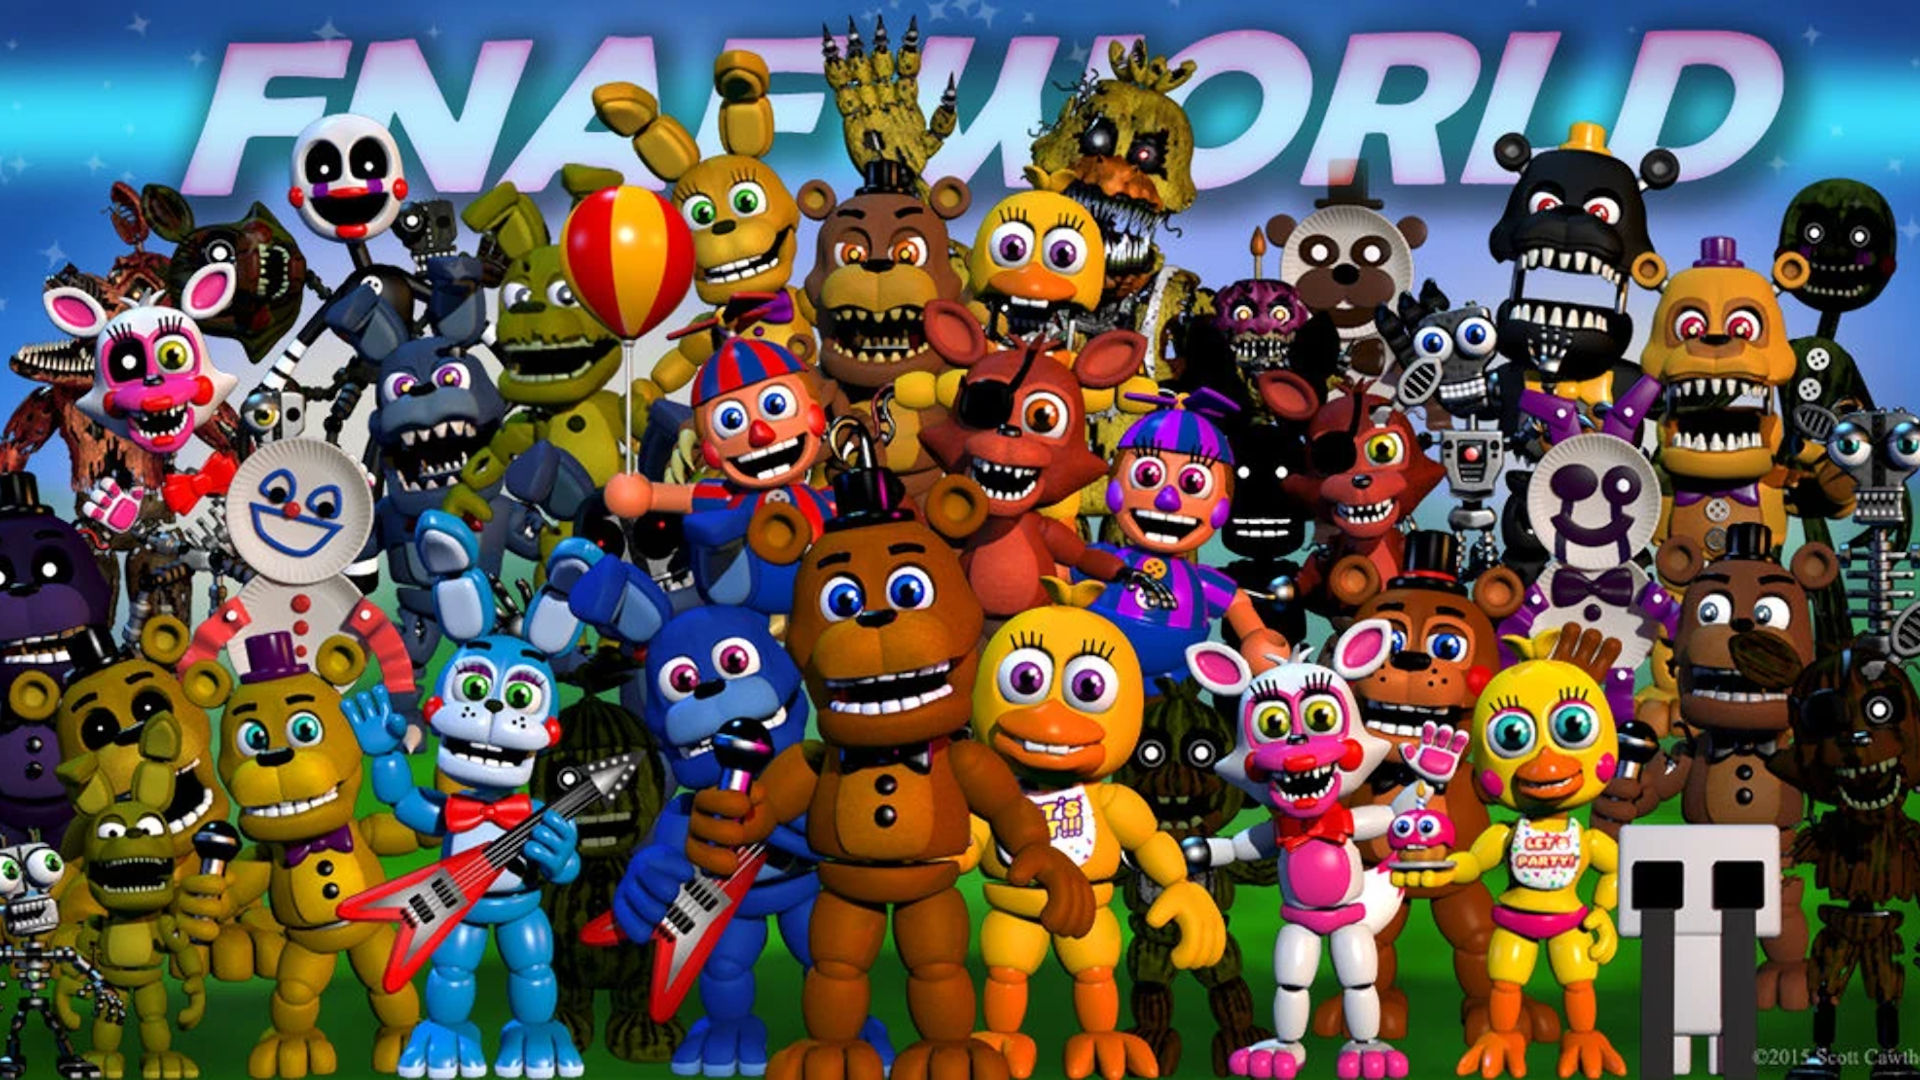 this and freddy FNAF 1 in the Withered version : r/Dawko